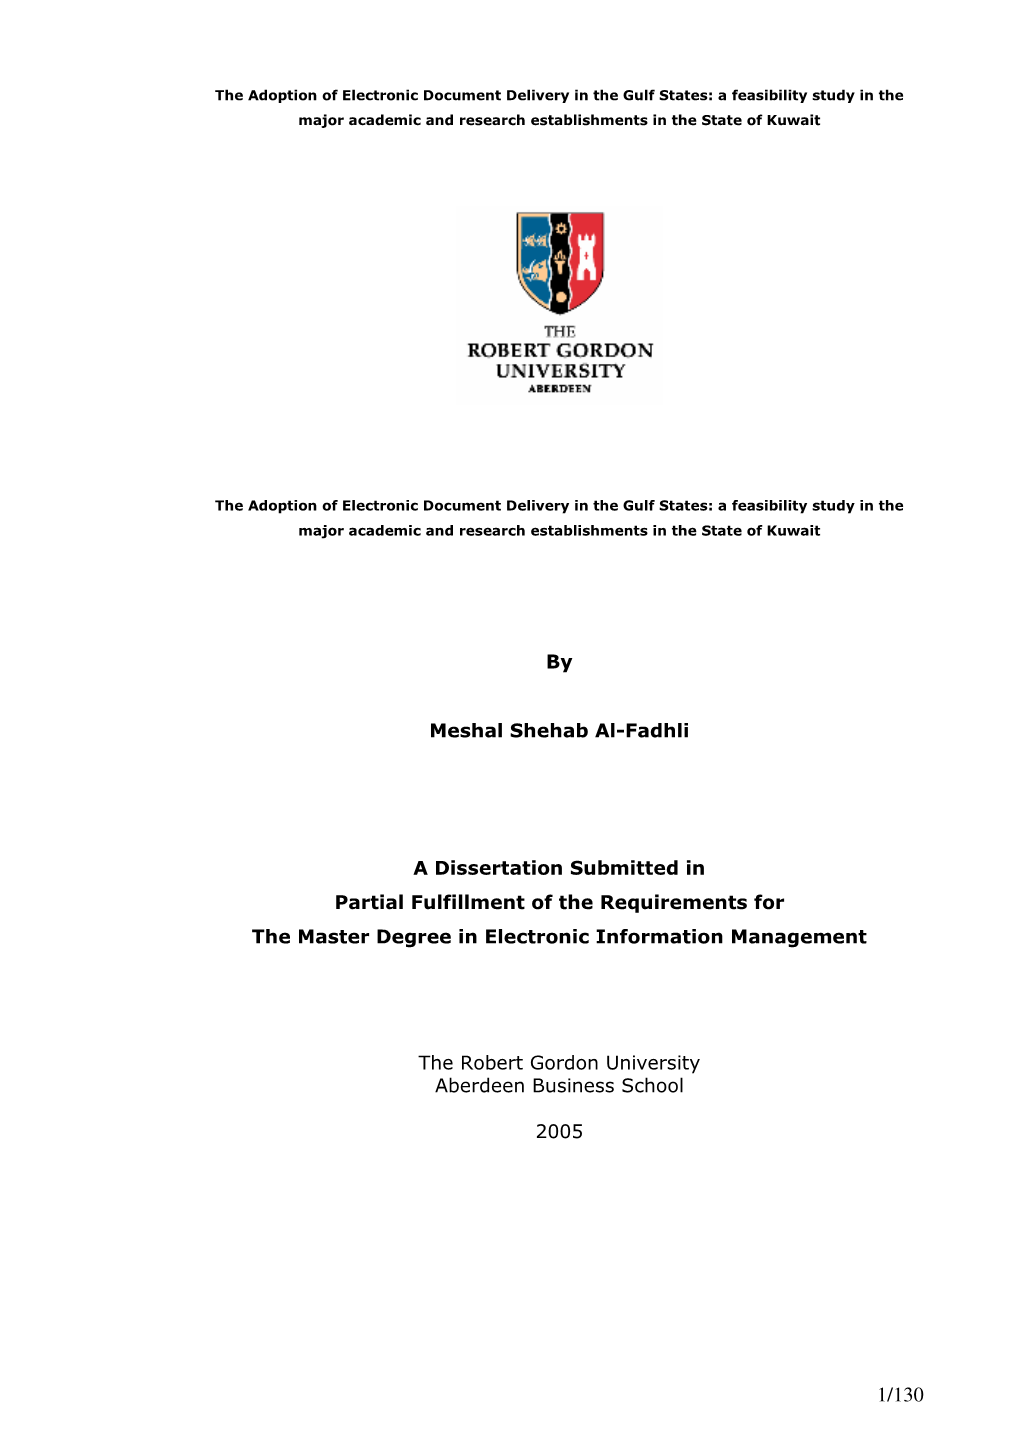 By Meshal Shehab Al-Fadhli a Dissertation Submitted in Partial Fulfillment of the Requirements for the Master Degree in Electron